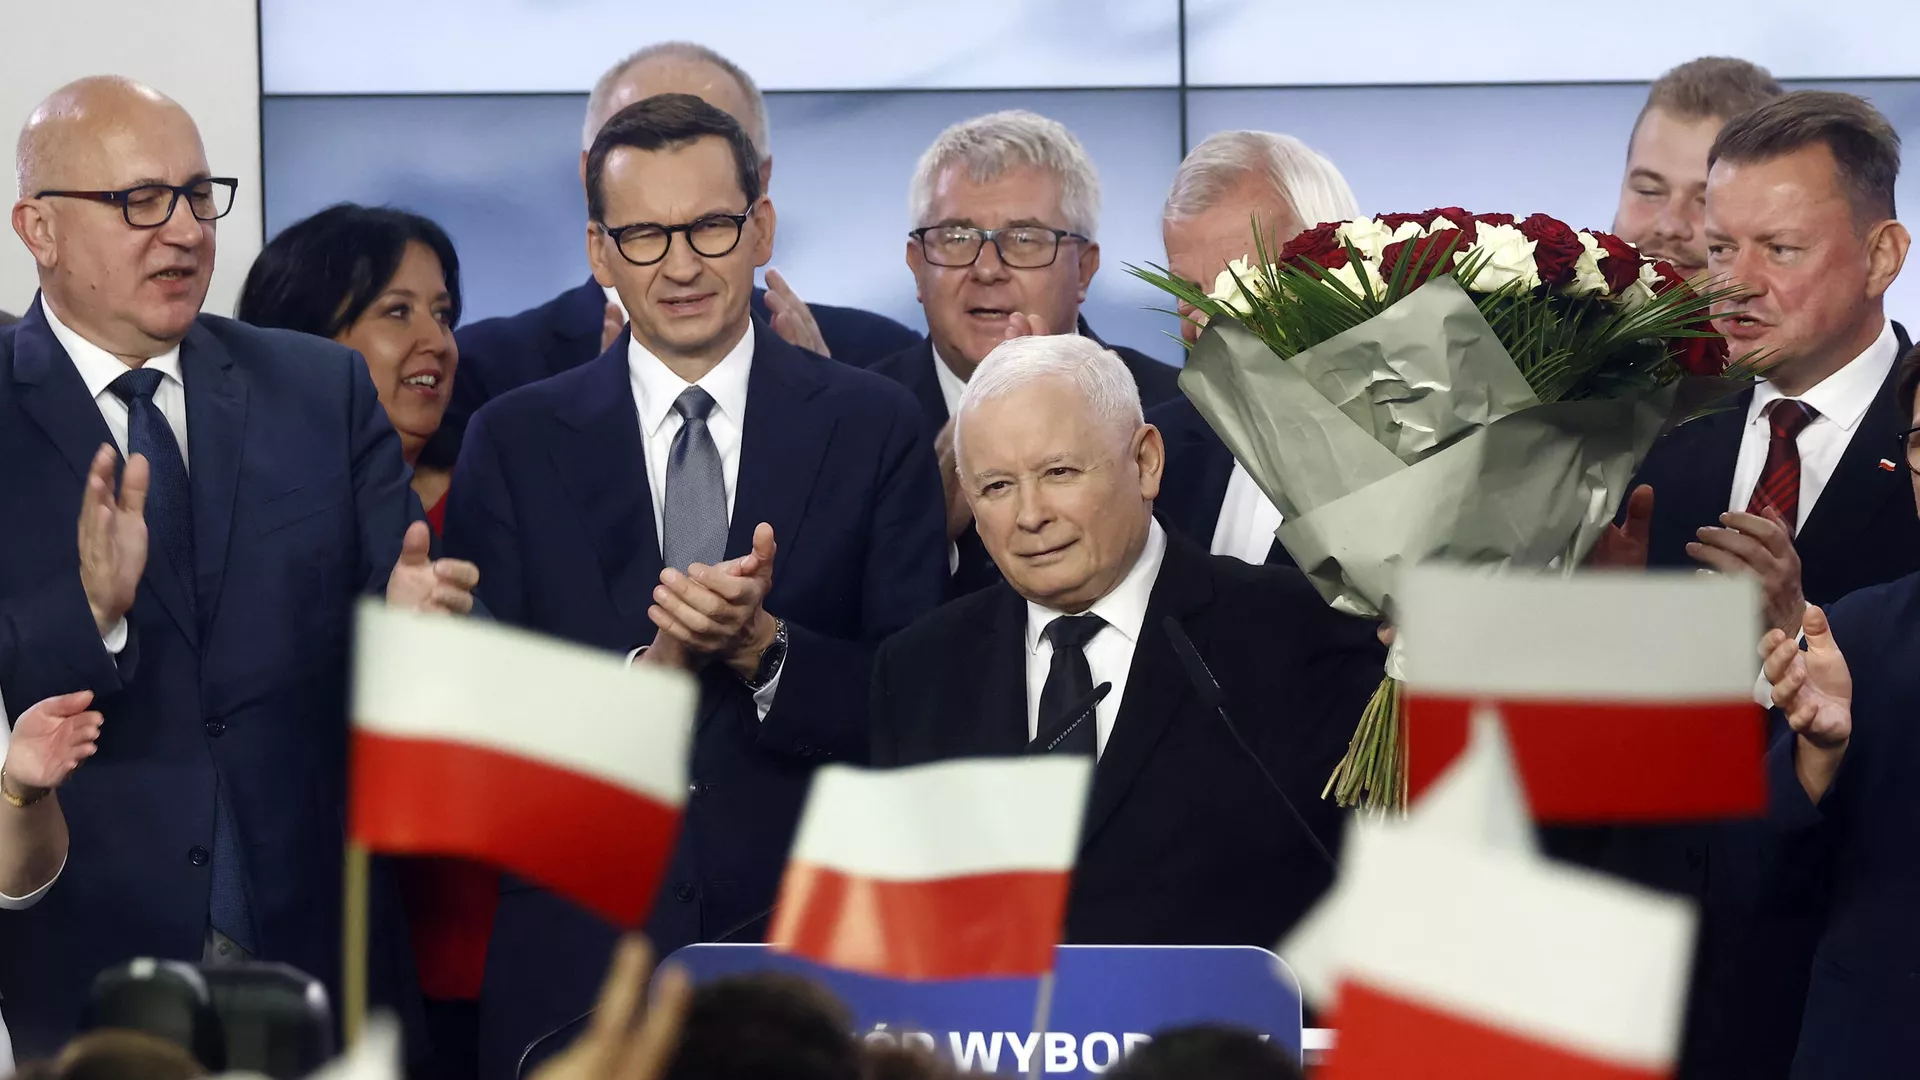 Poland’s Supreme Court Reviewing Election Complaints as Country’s Future Hangs in Balance